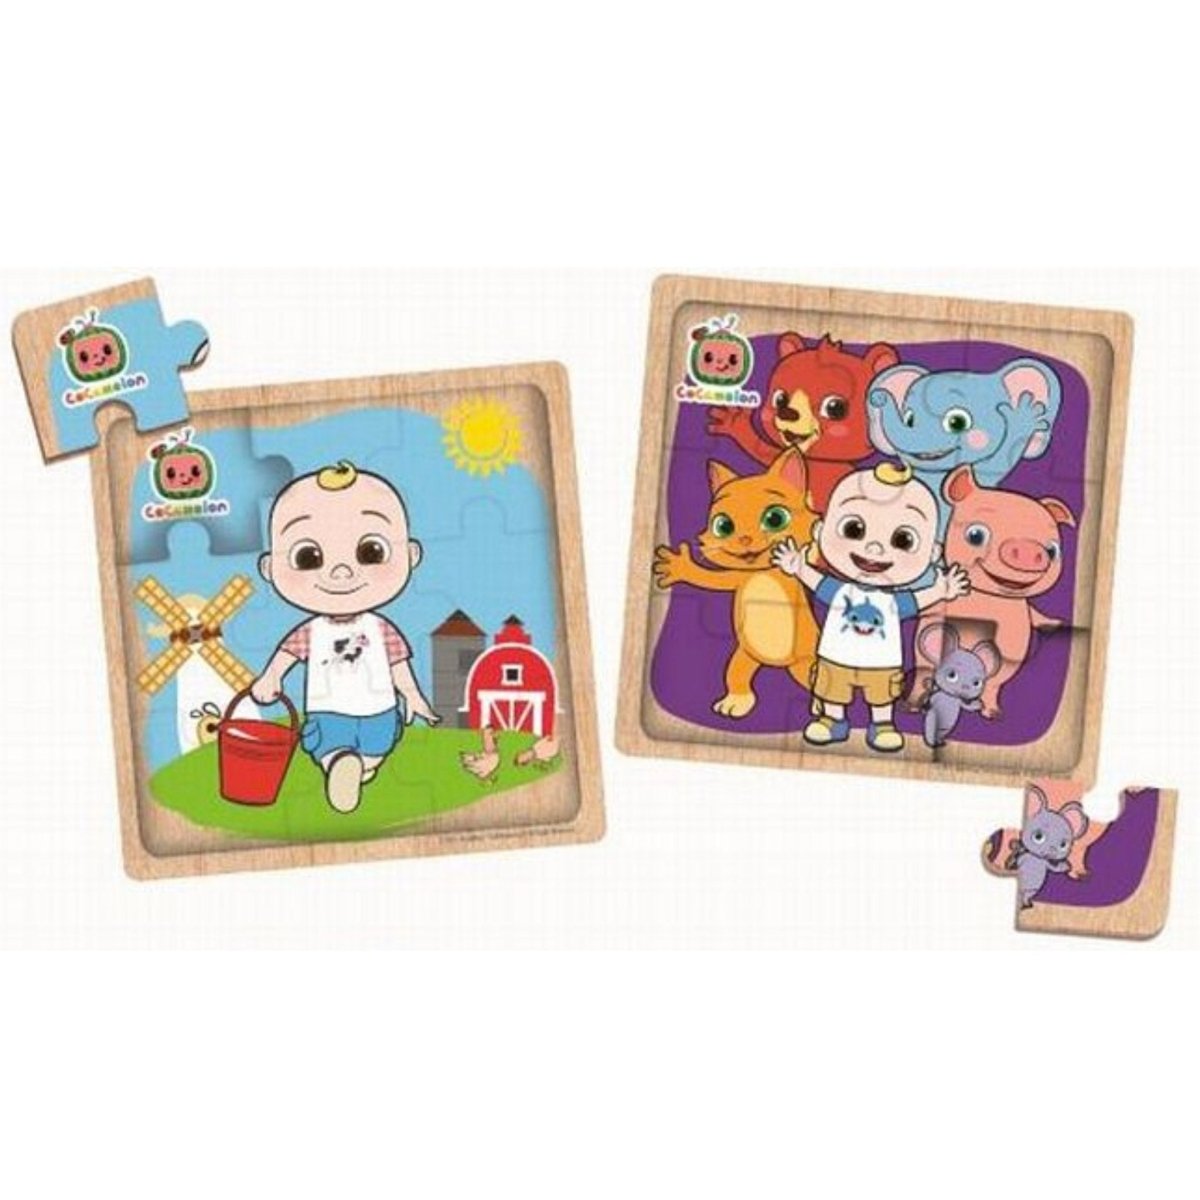 Cocomelon Wooden Puzzle 9 Piece - Kids Party Craft